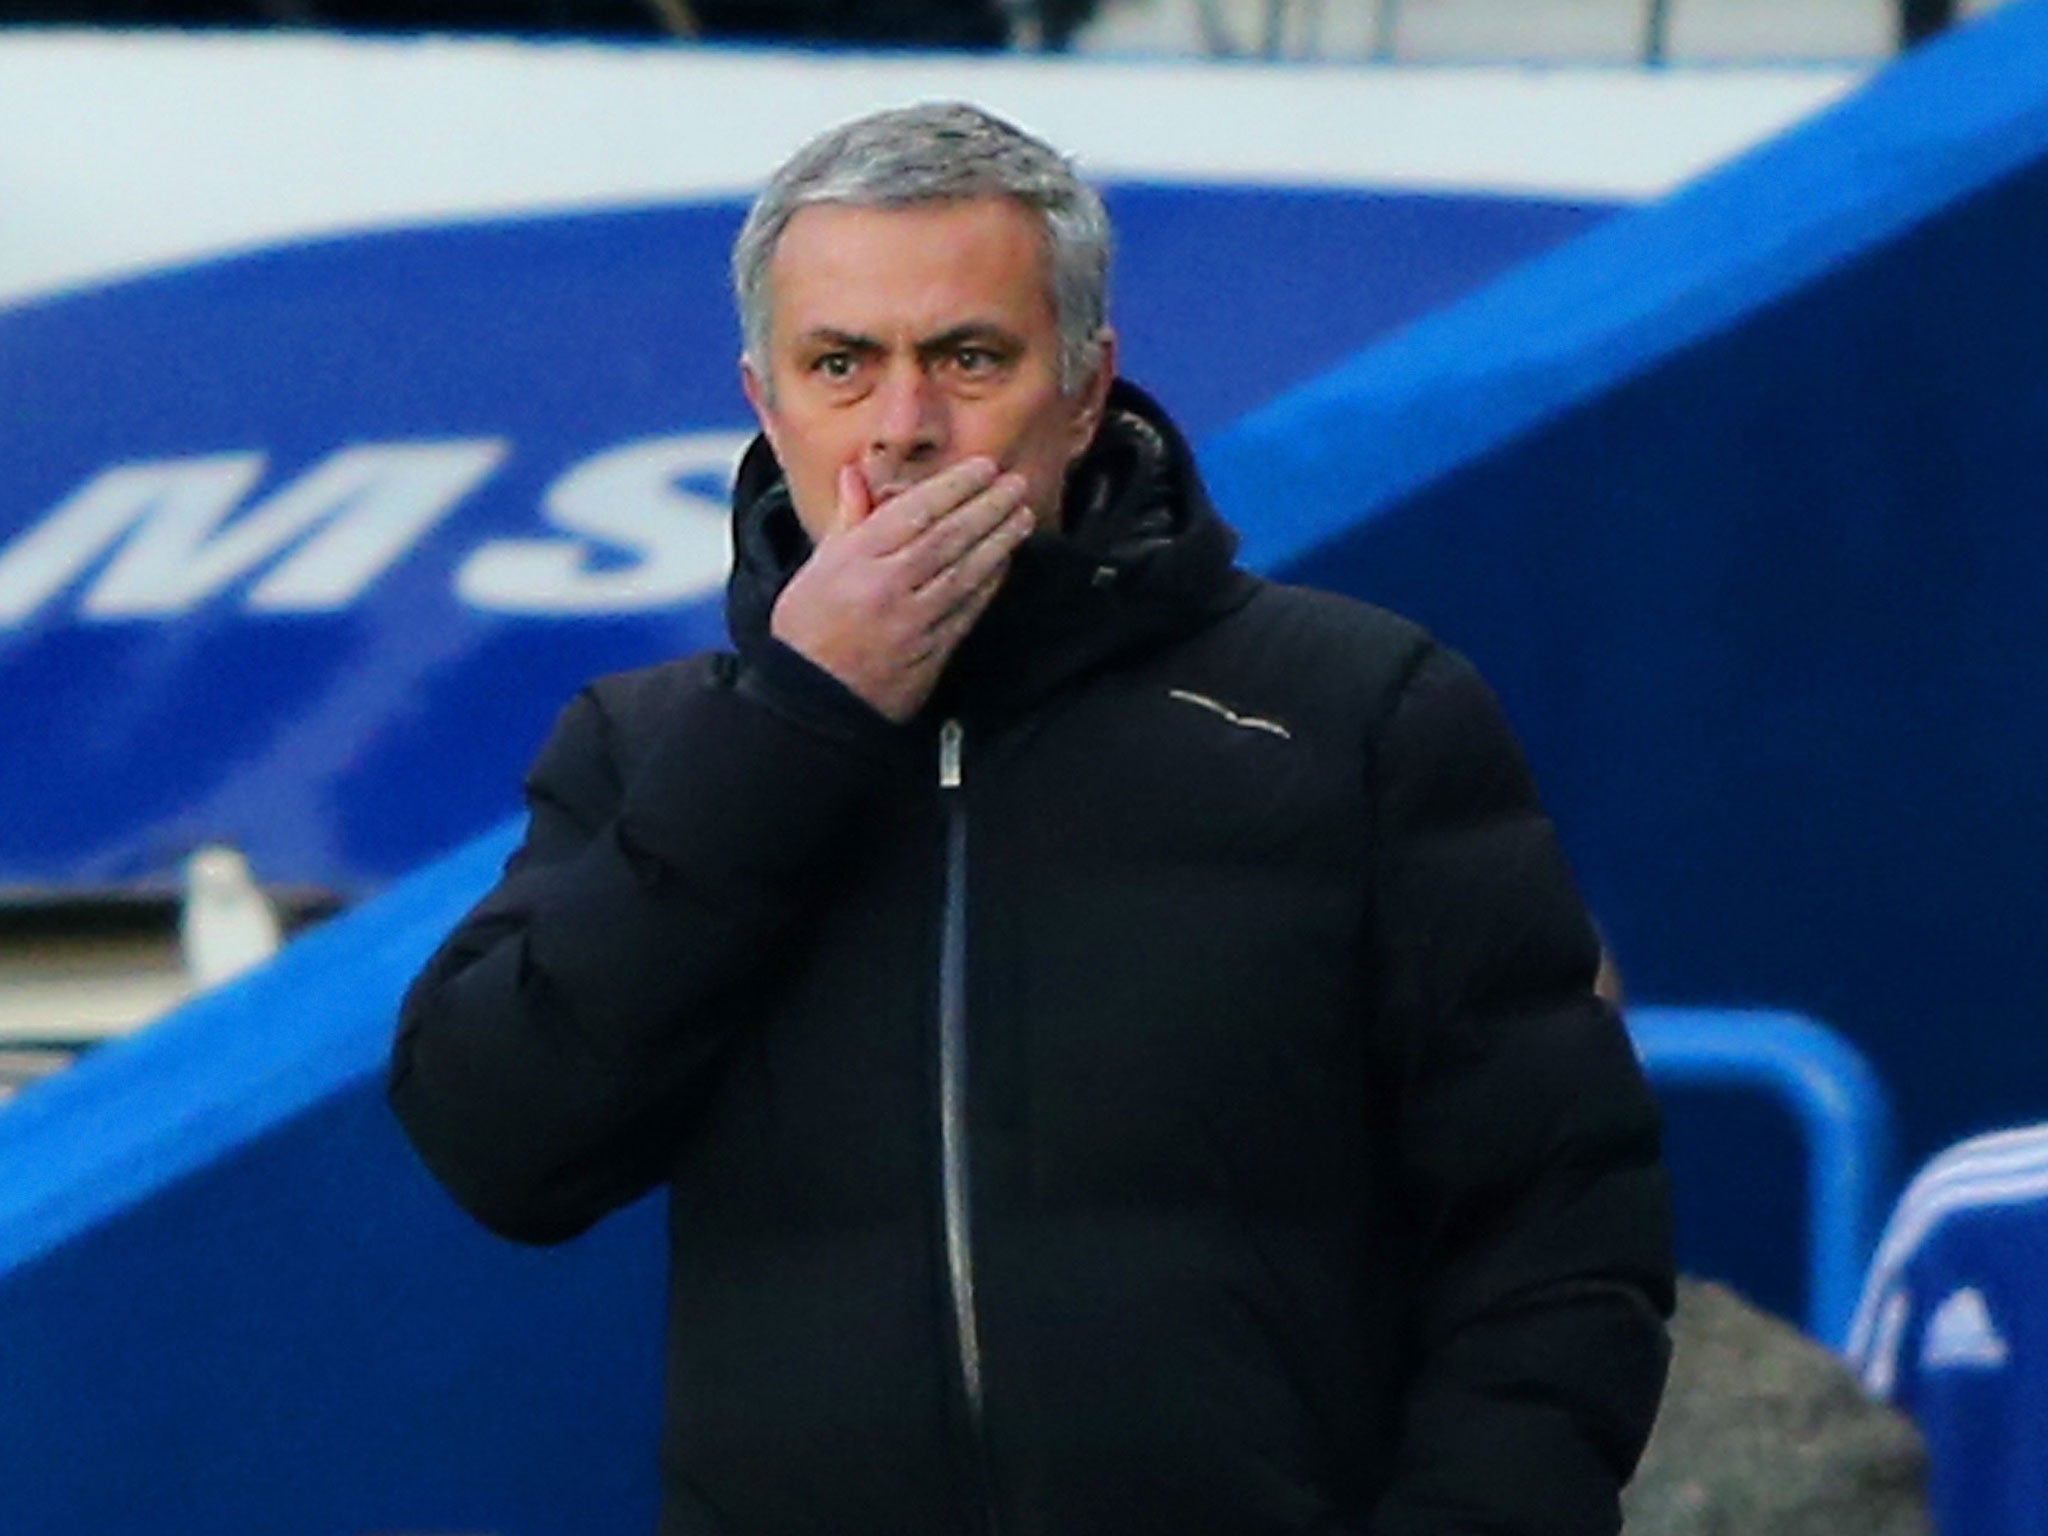 Jose Mourinho does not believe Chelsea are realistic title contenders this season